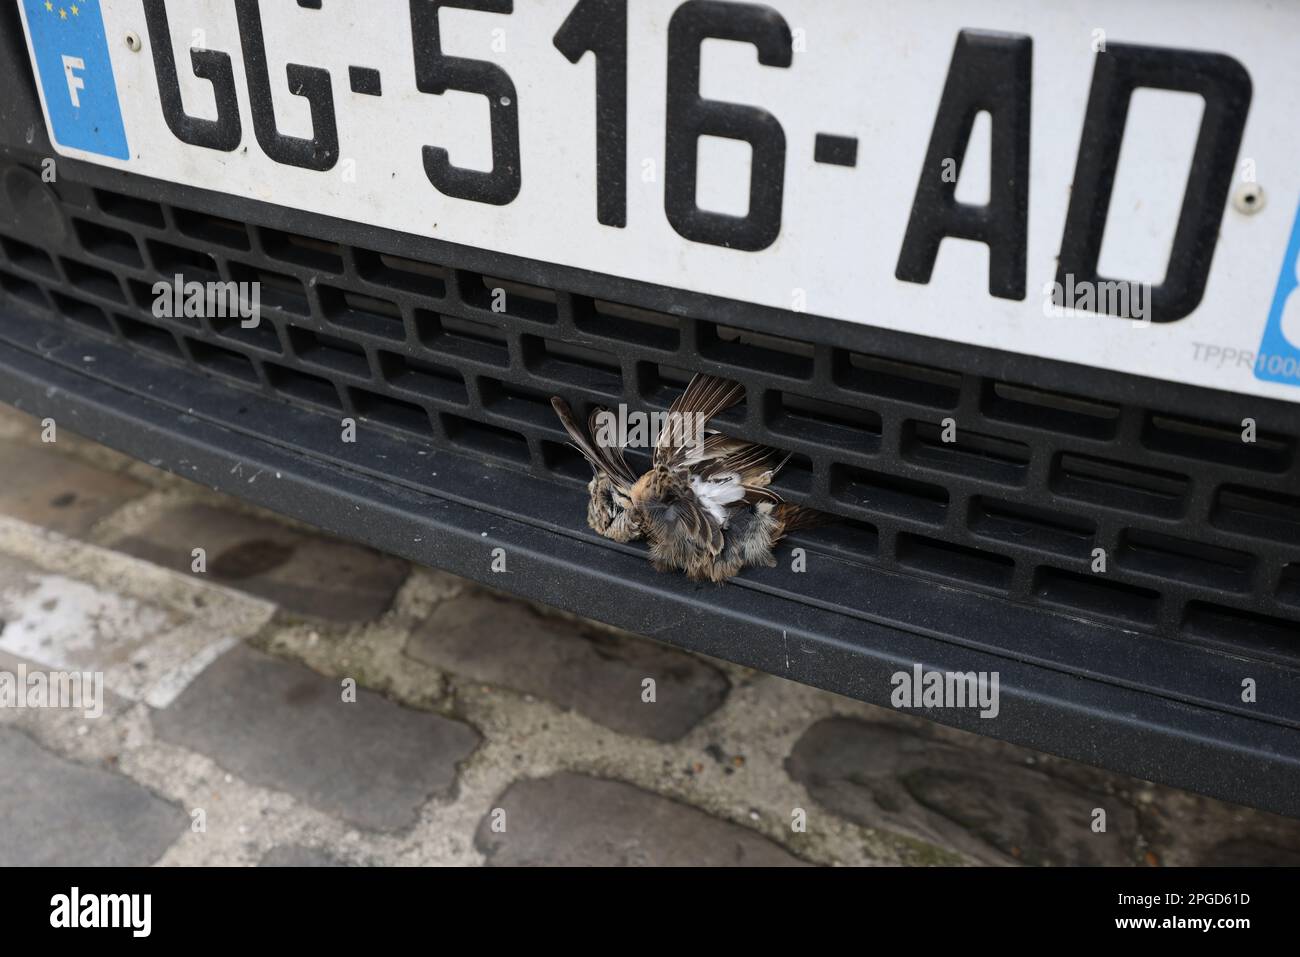 Dead bird pictured on the bumper of a car in Senlis, France. Stock Photo